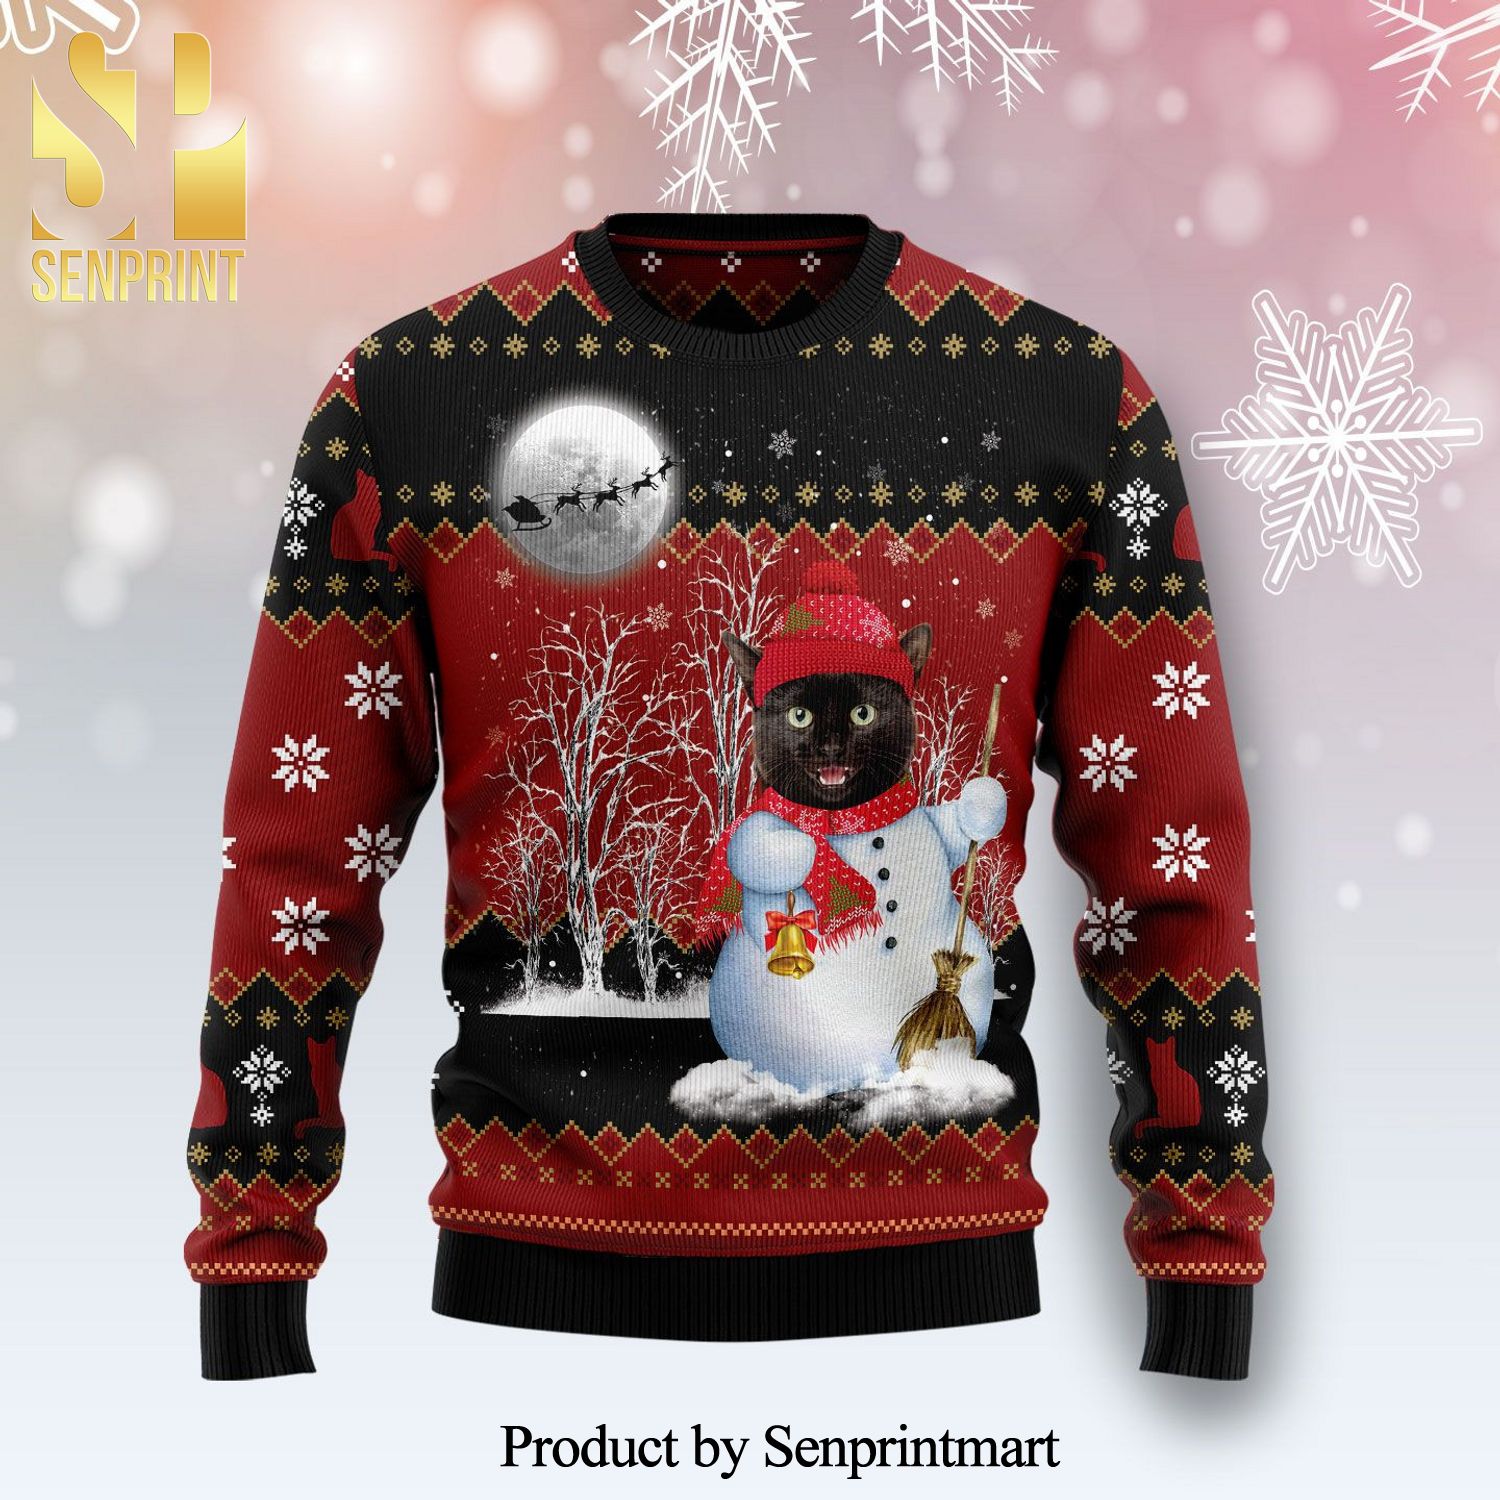 Black Cat Snowman Knitted Ugly Christmas Sweater